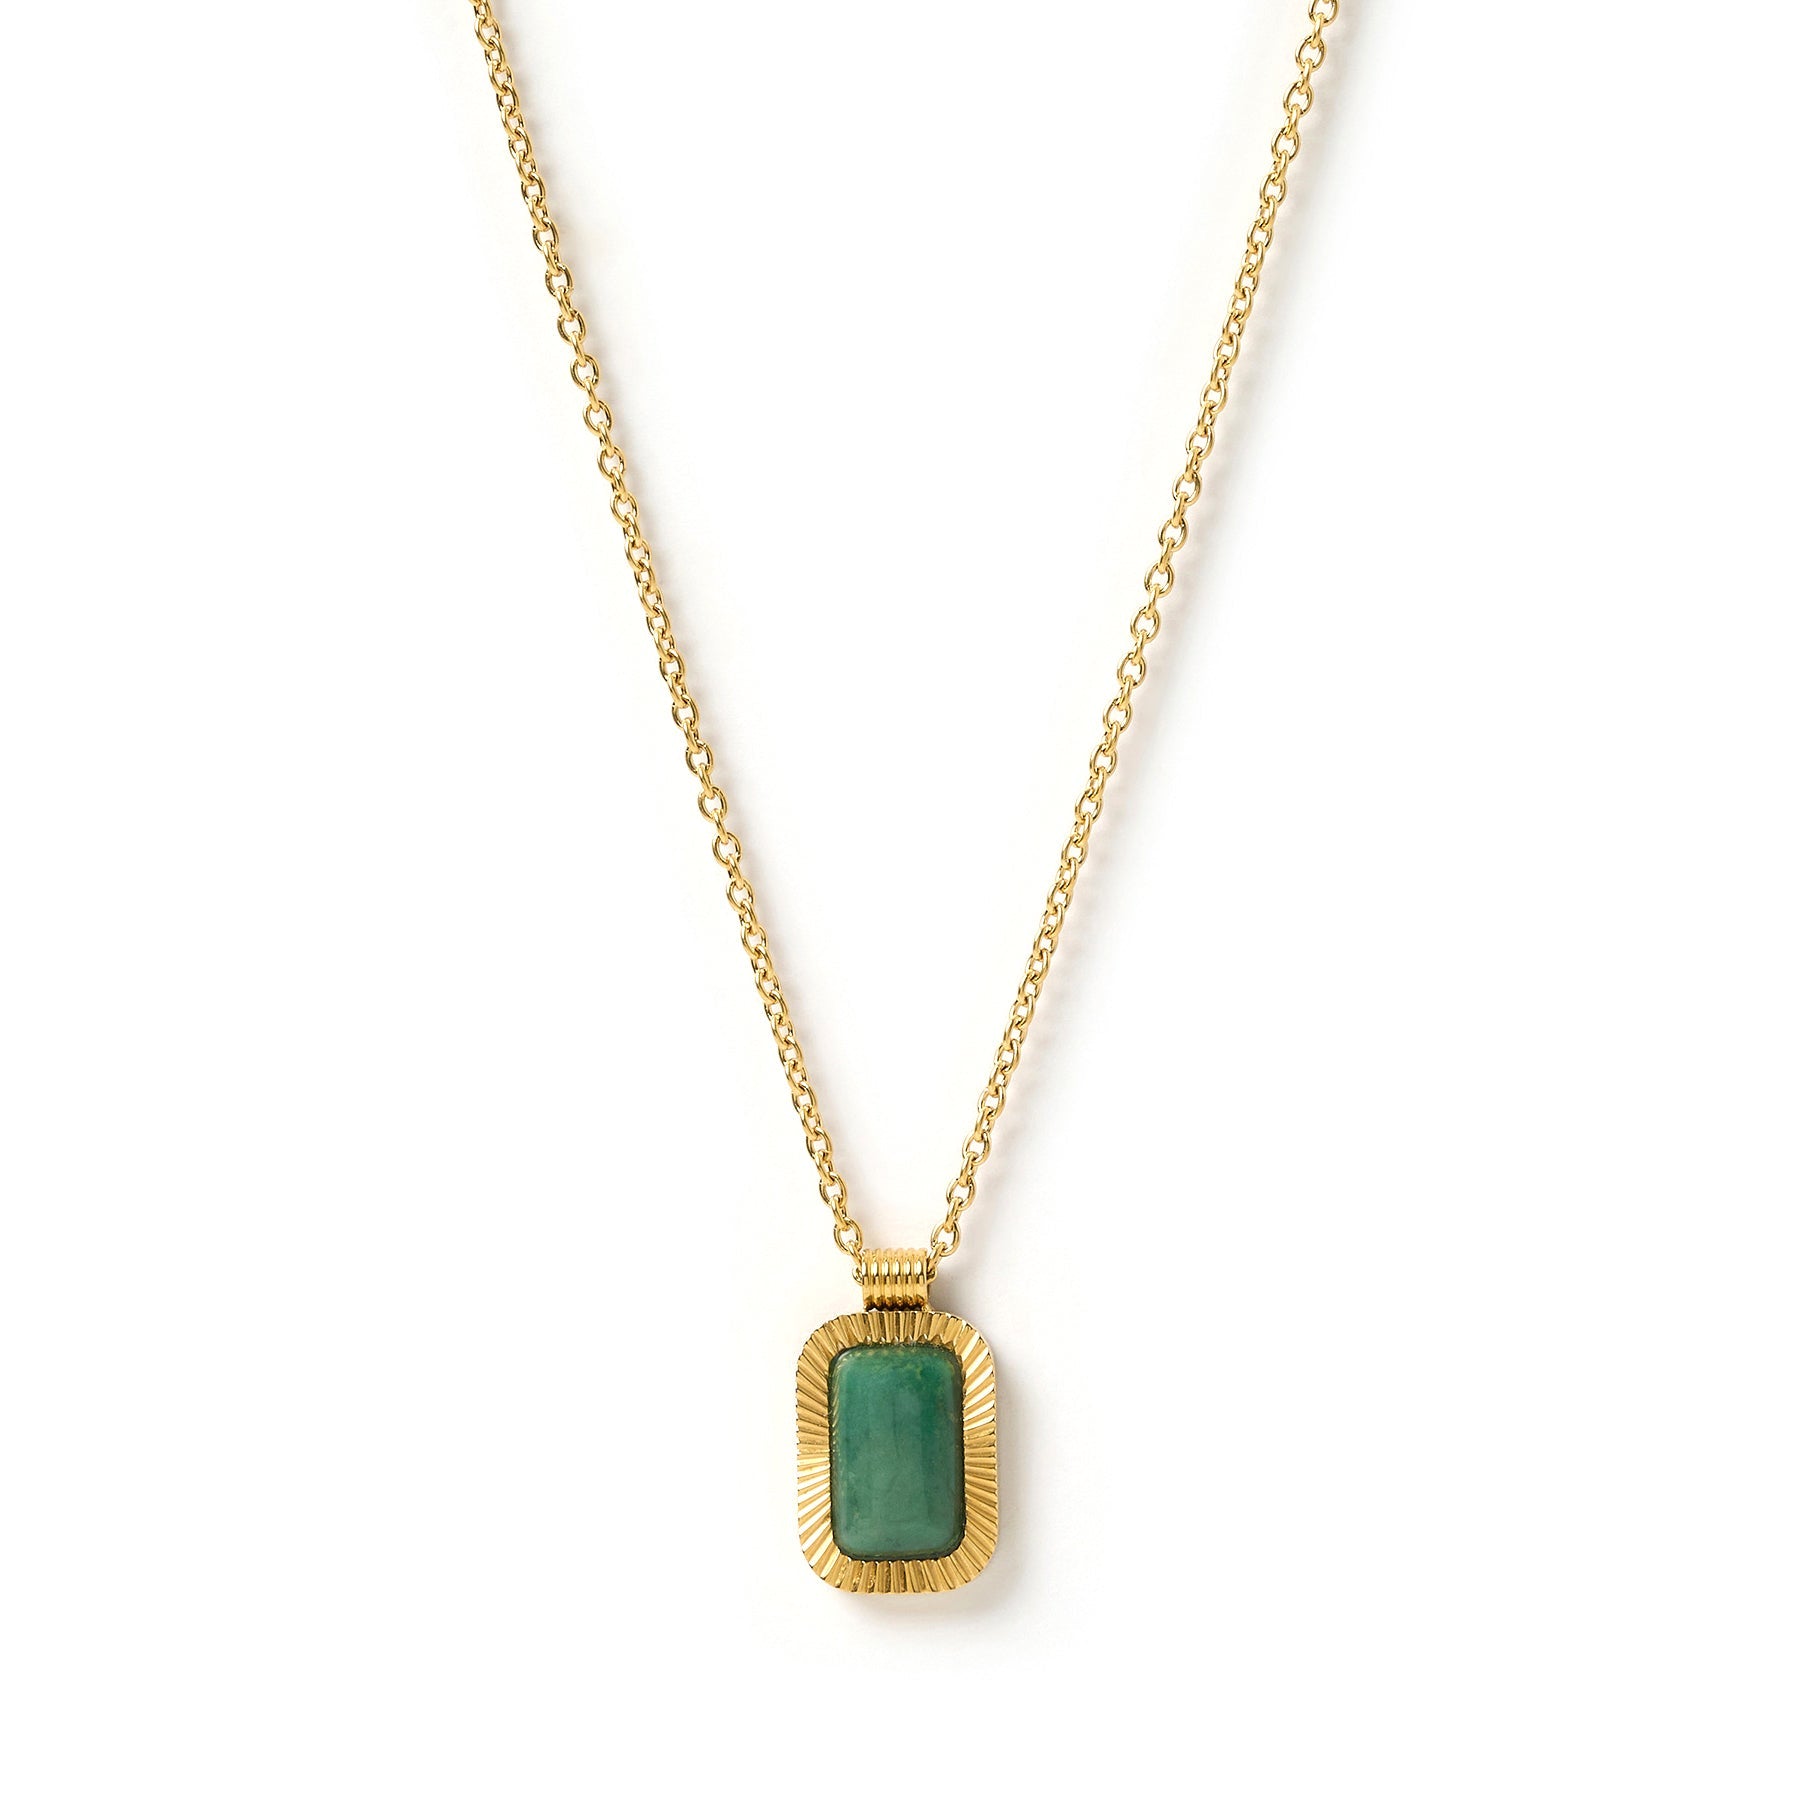 Teo Gold Necklace - Jade